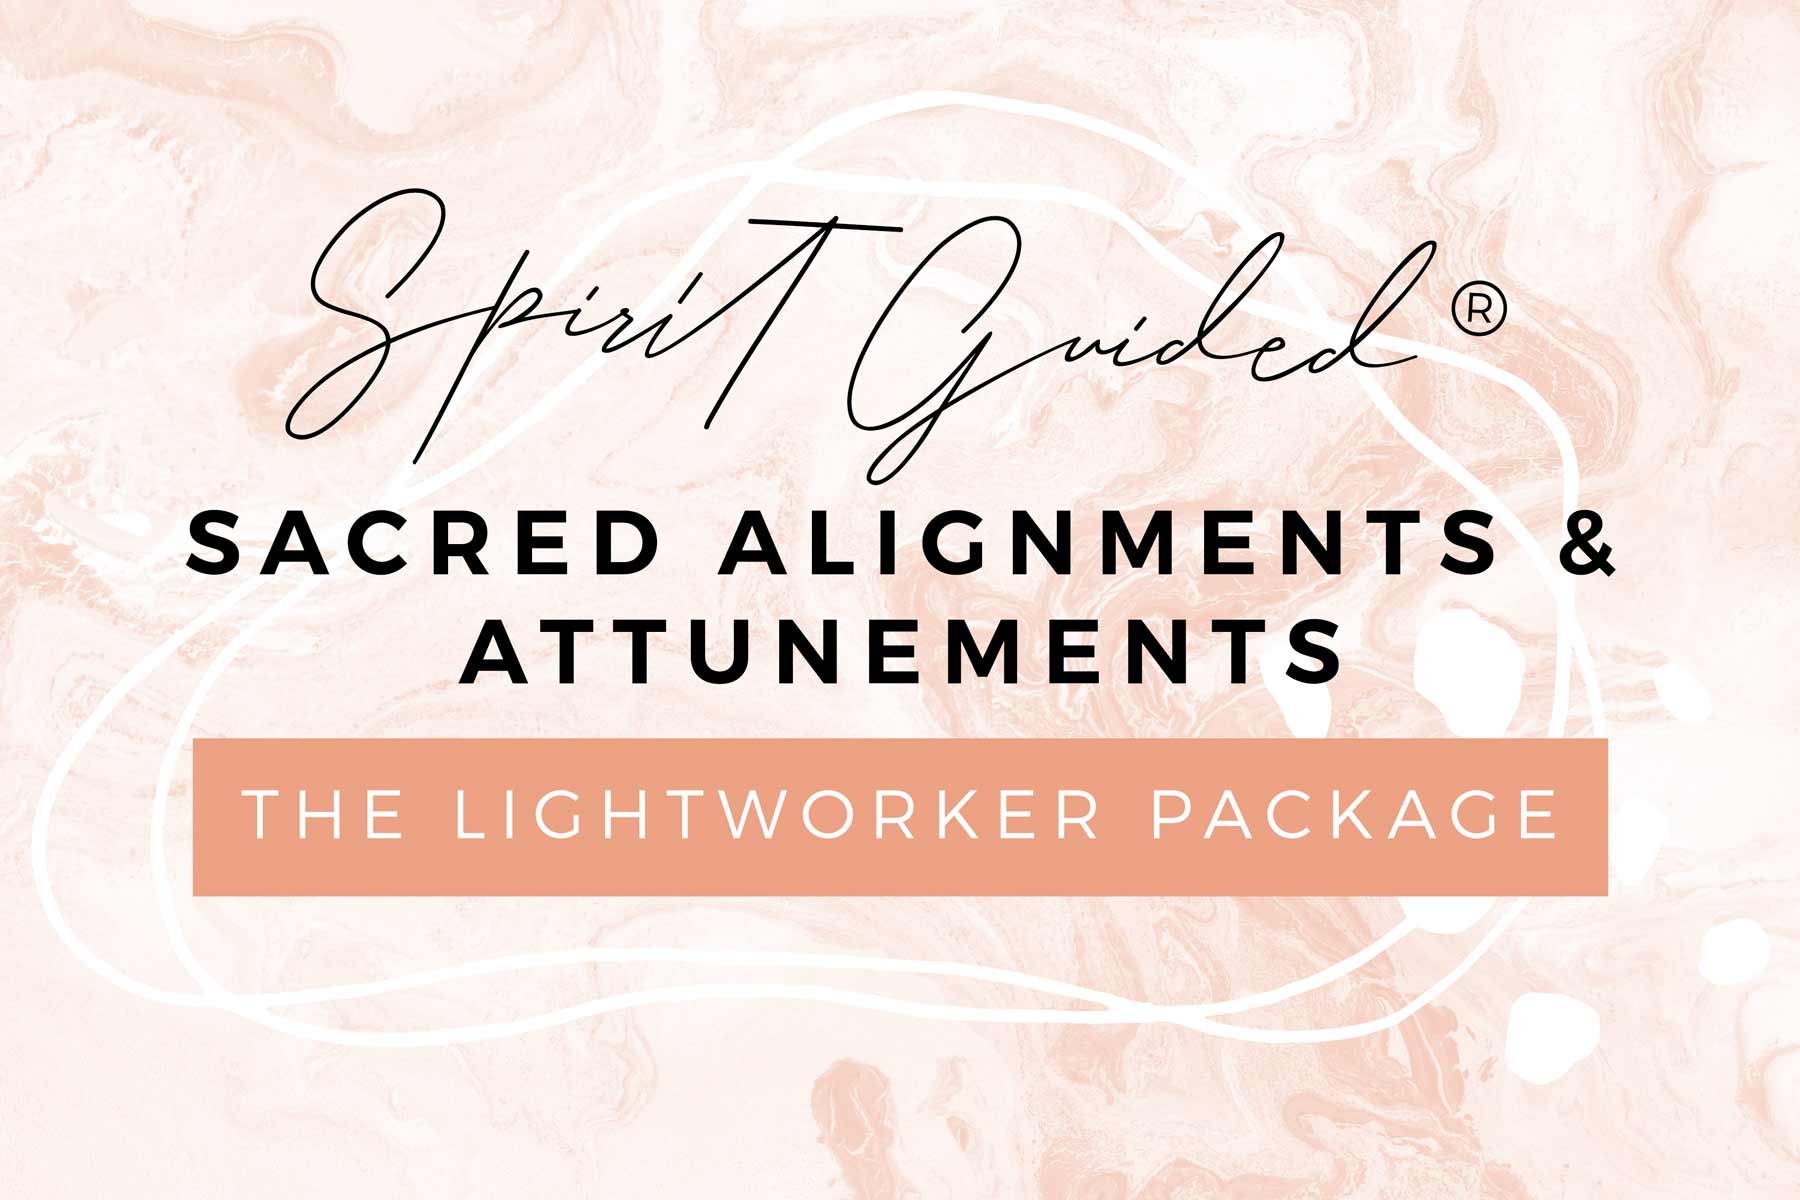 Spirit Guided ® Sacred Alignments & Attunements - The Lightworker Package